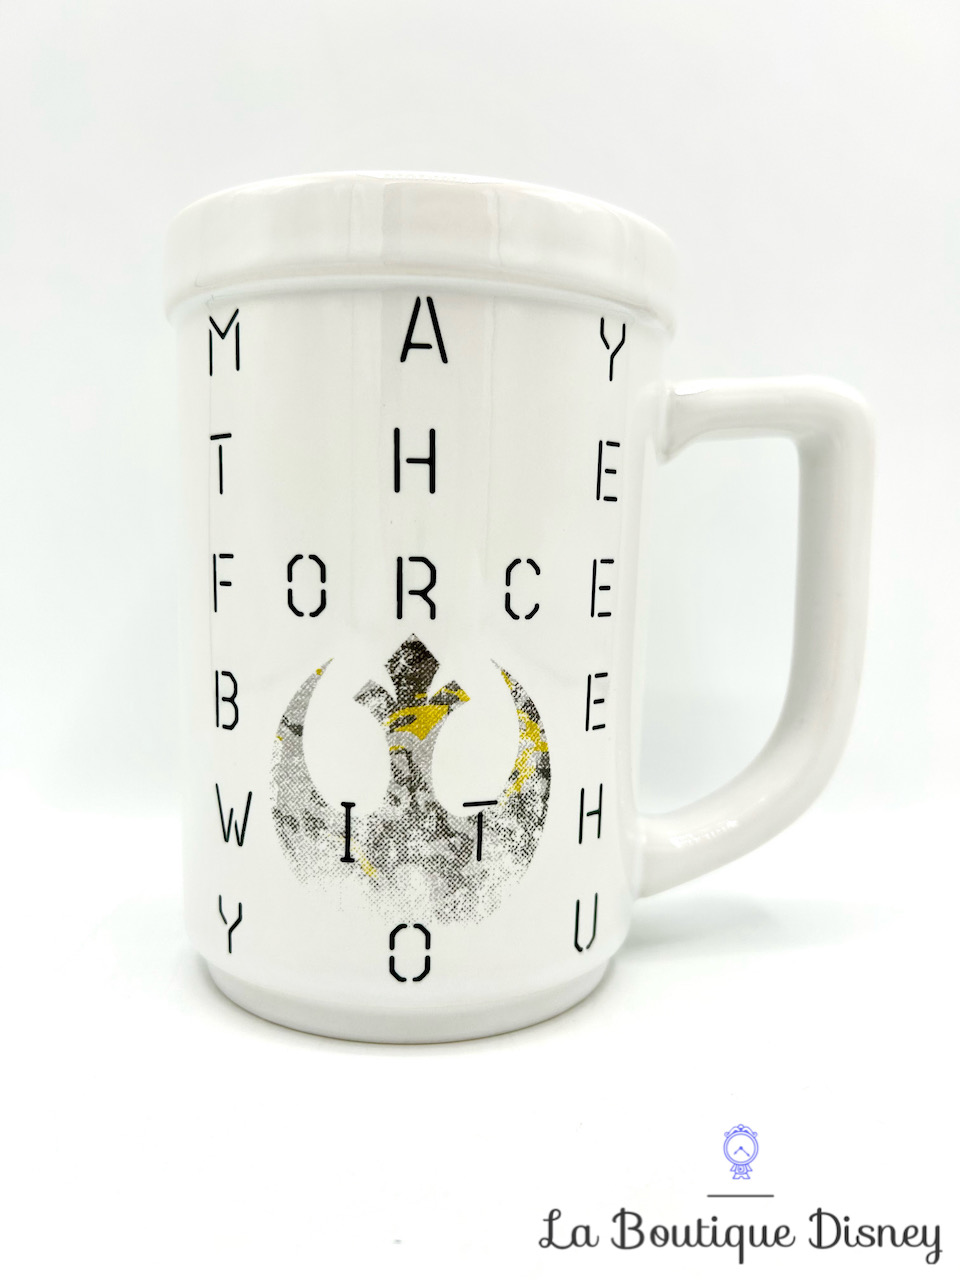 Tasse May the Force Be With You Star Wars Disney Parks 2018 mug alliance rebelle blanc